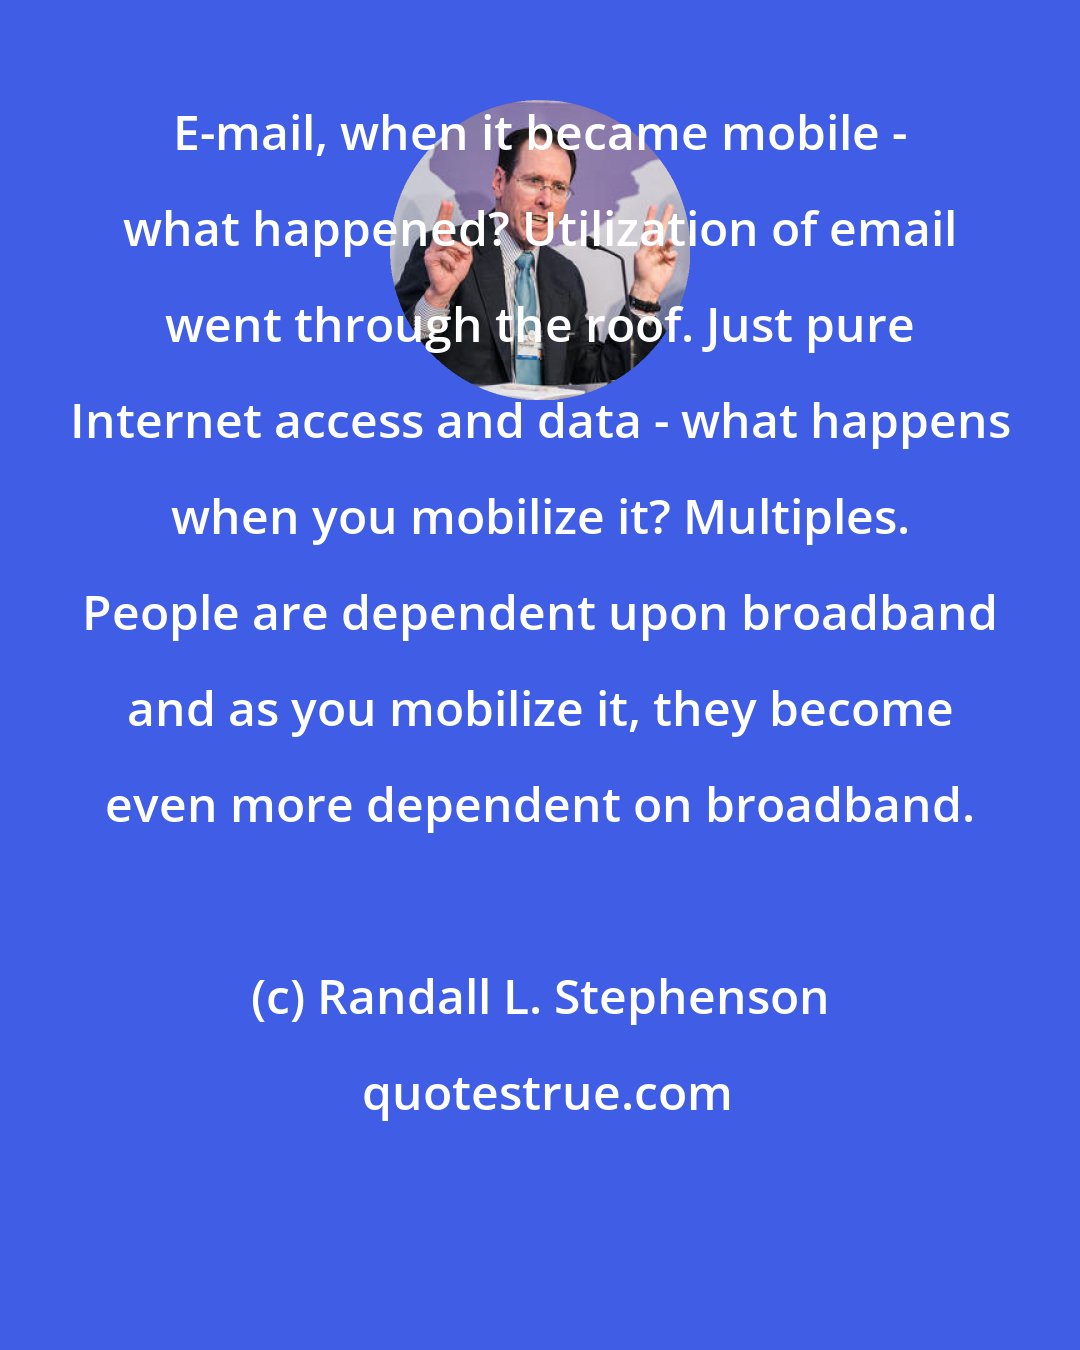 Randall L. Stephenson: E-mail, when it became mobile - what happened? Utilization of email went through the roof. Just pure Internet access and data - what happens when you mobilize it? Multiples. People are dependent upon broadband and as you mobilize it, they become even more dependent on broadband.